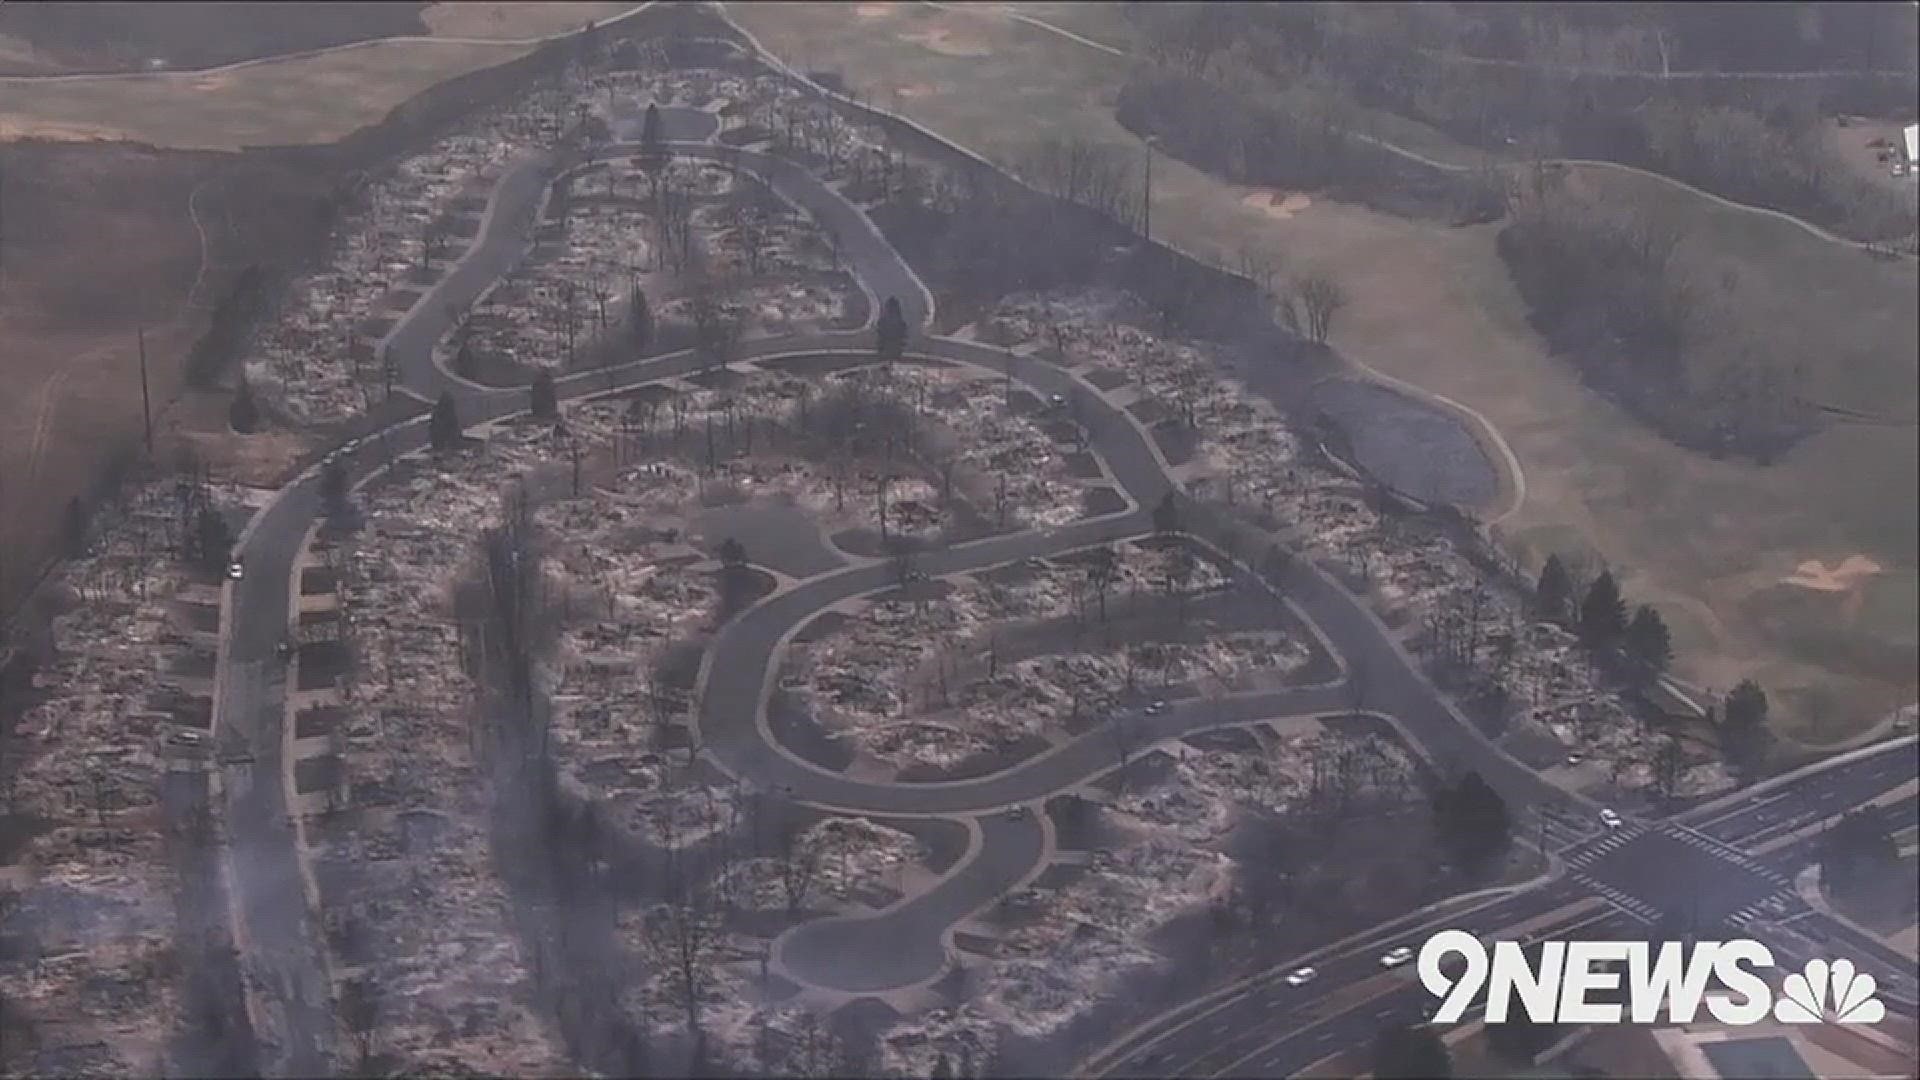 This is what we saw from Sky9 today as it flew over the destruction caused by the Marshall Fire in Boulder County. The sheriff guesses 1,000 homes could be lost.